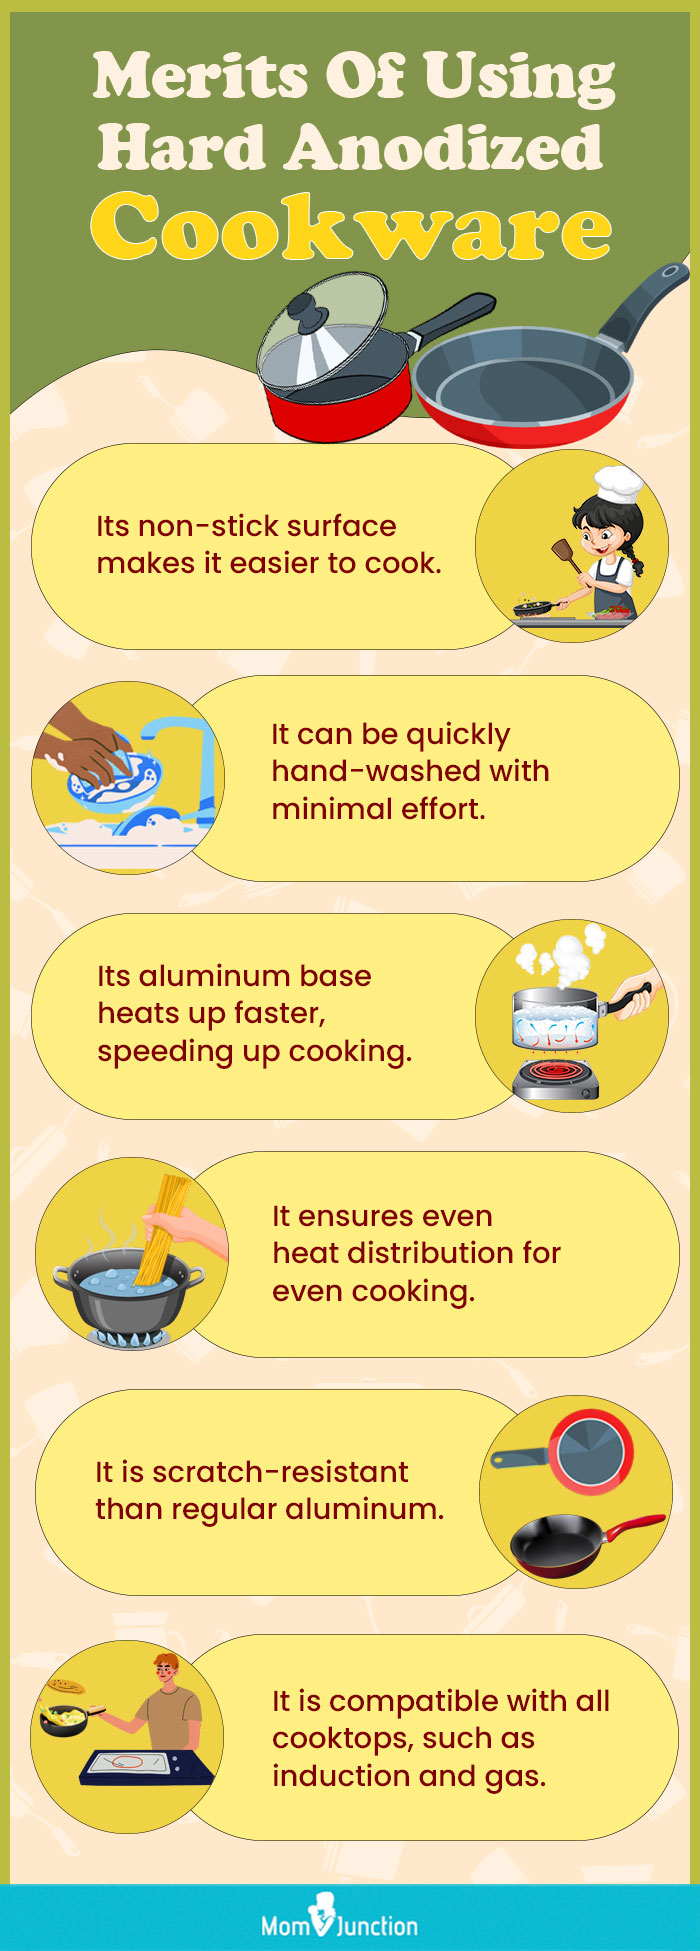 Merits Of Using Hard Anodized Cookware (infographic)